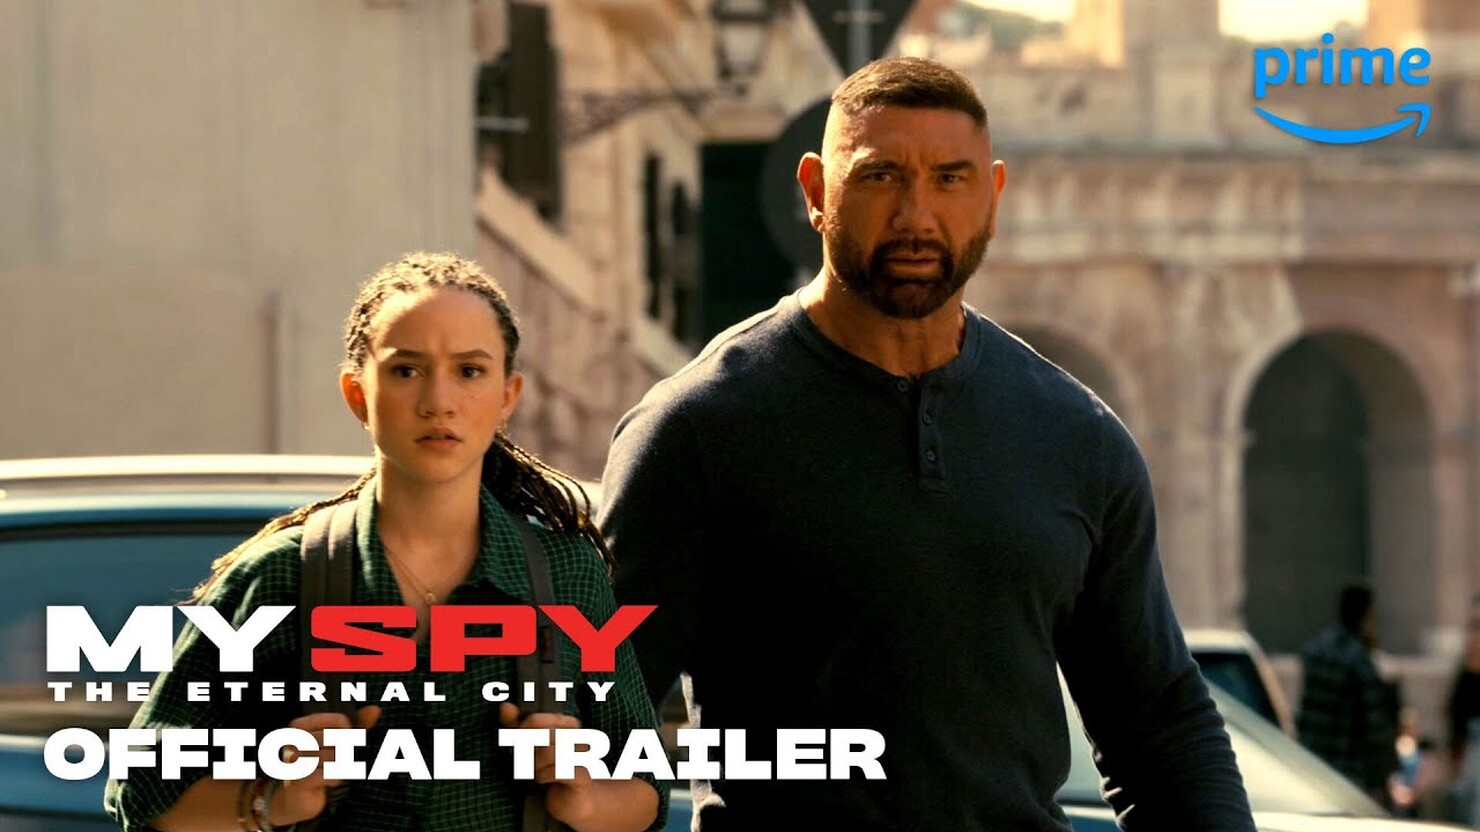 The movie My Spy: The Eternal City - Official Trailer | Amazon Prime Video